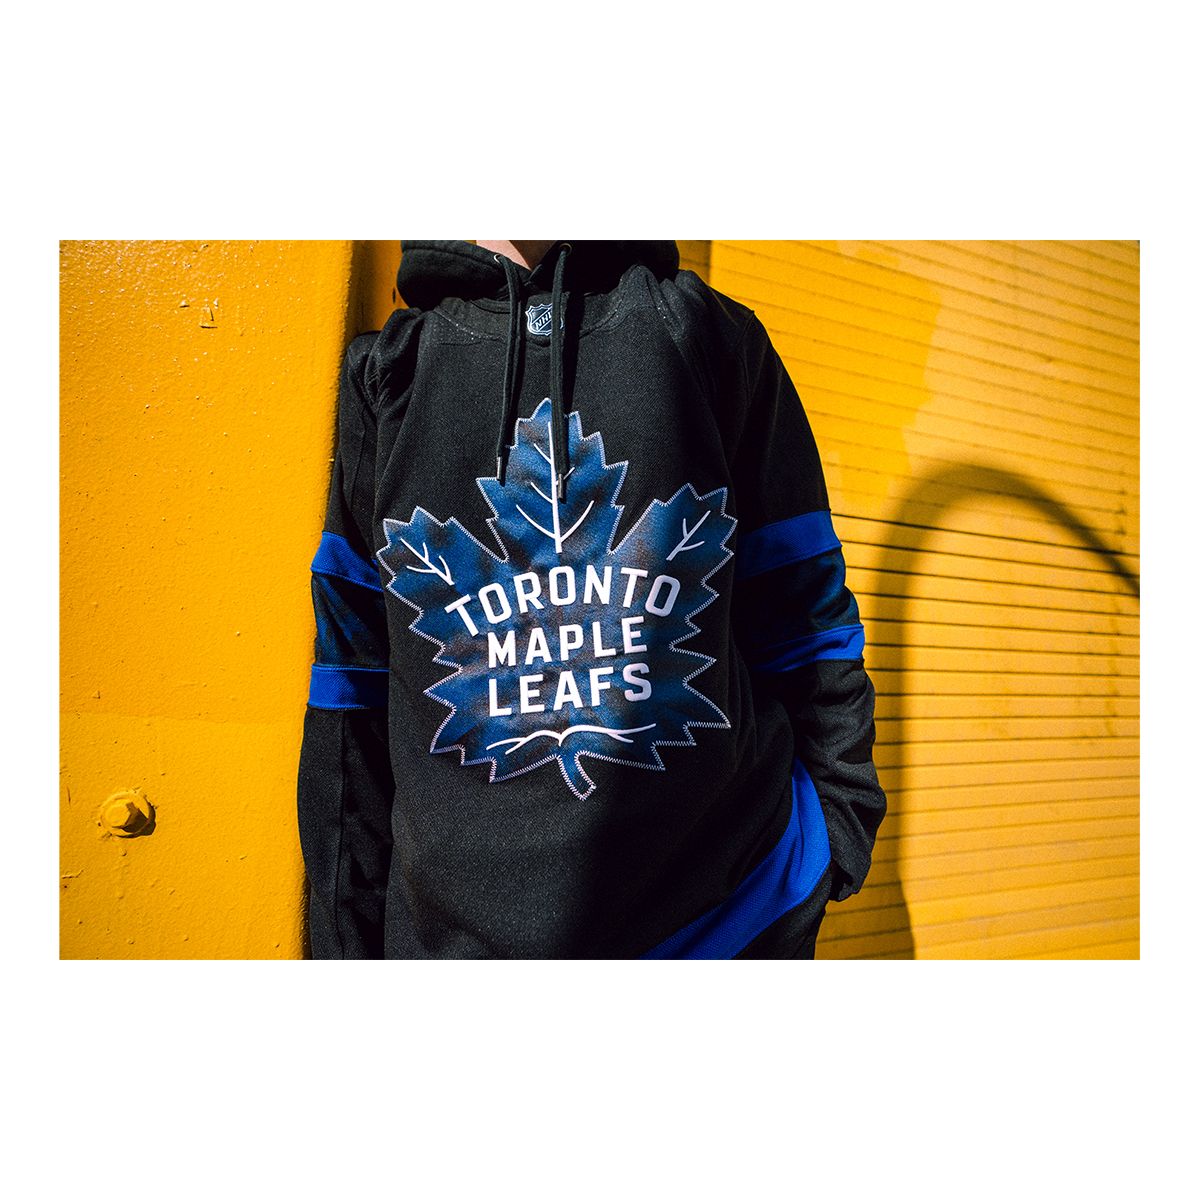 Bieber shows up to ACC in custom Leafs jersey for Game 6 - Article - Bardown